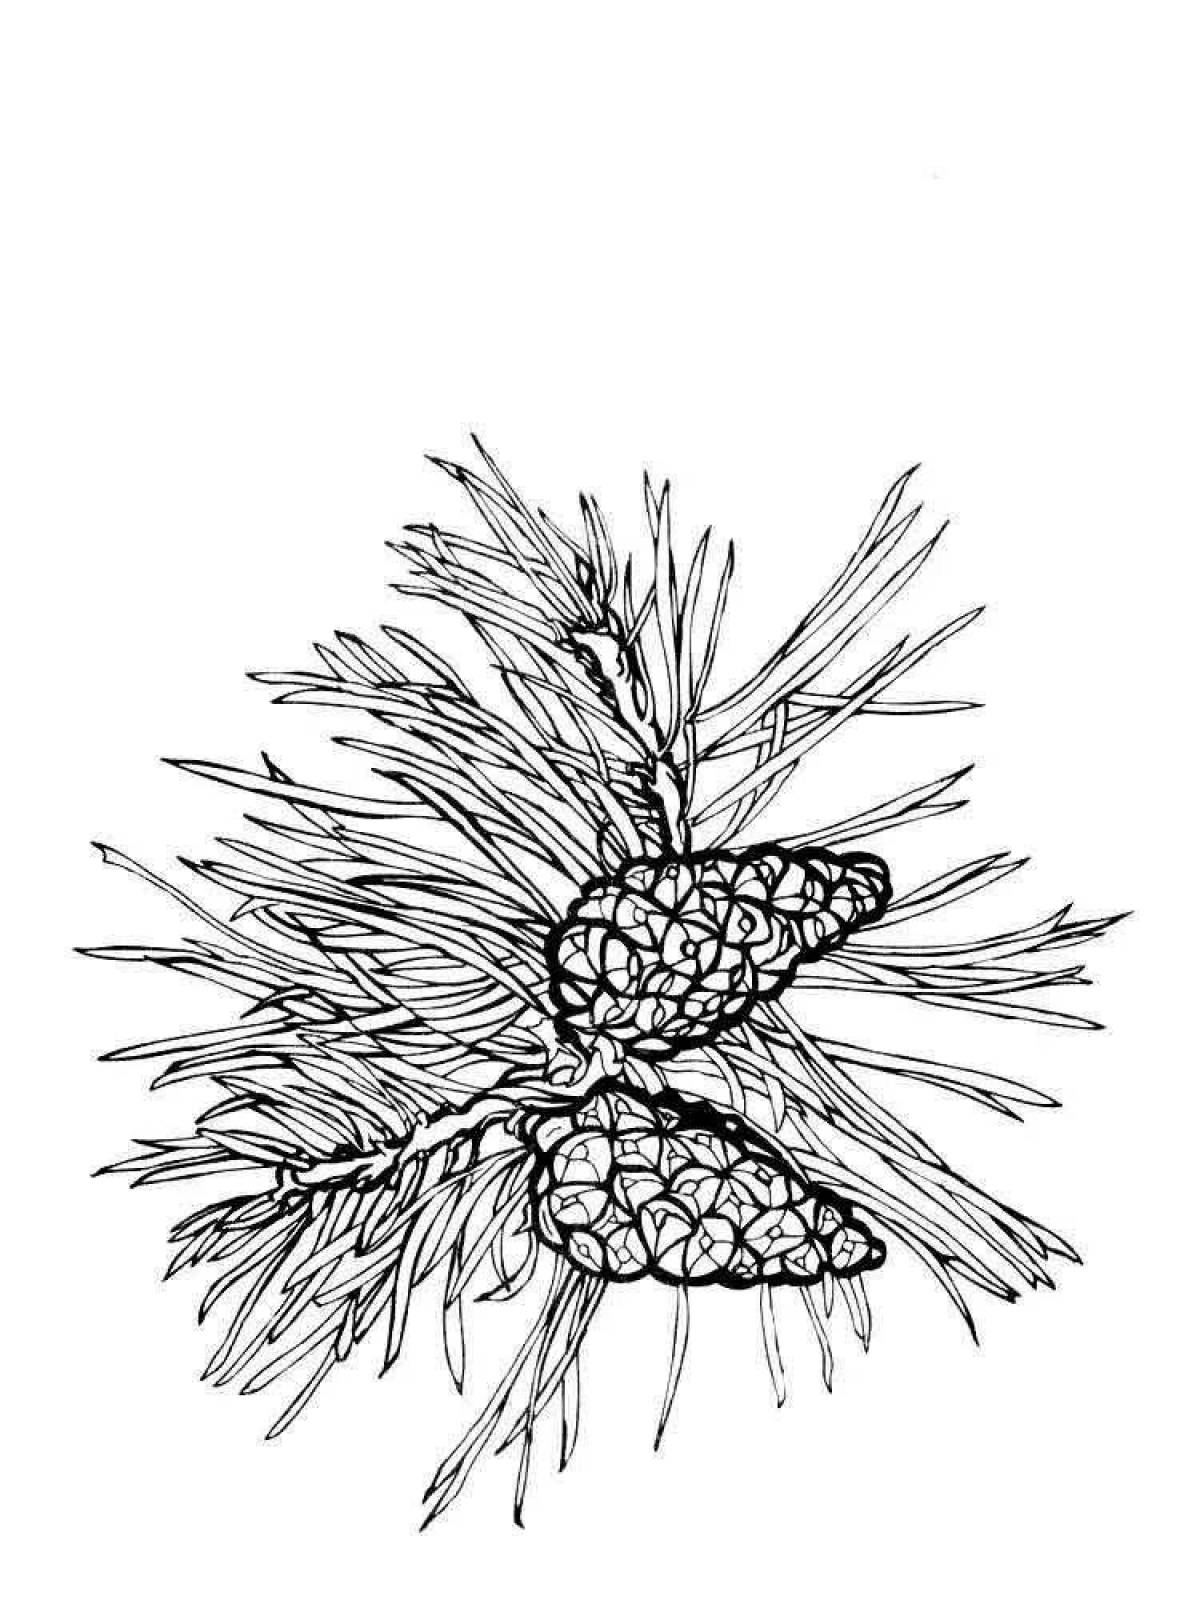 Coloring page joyful pine tree for children